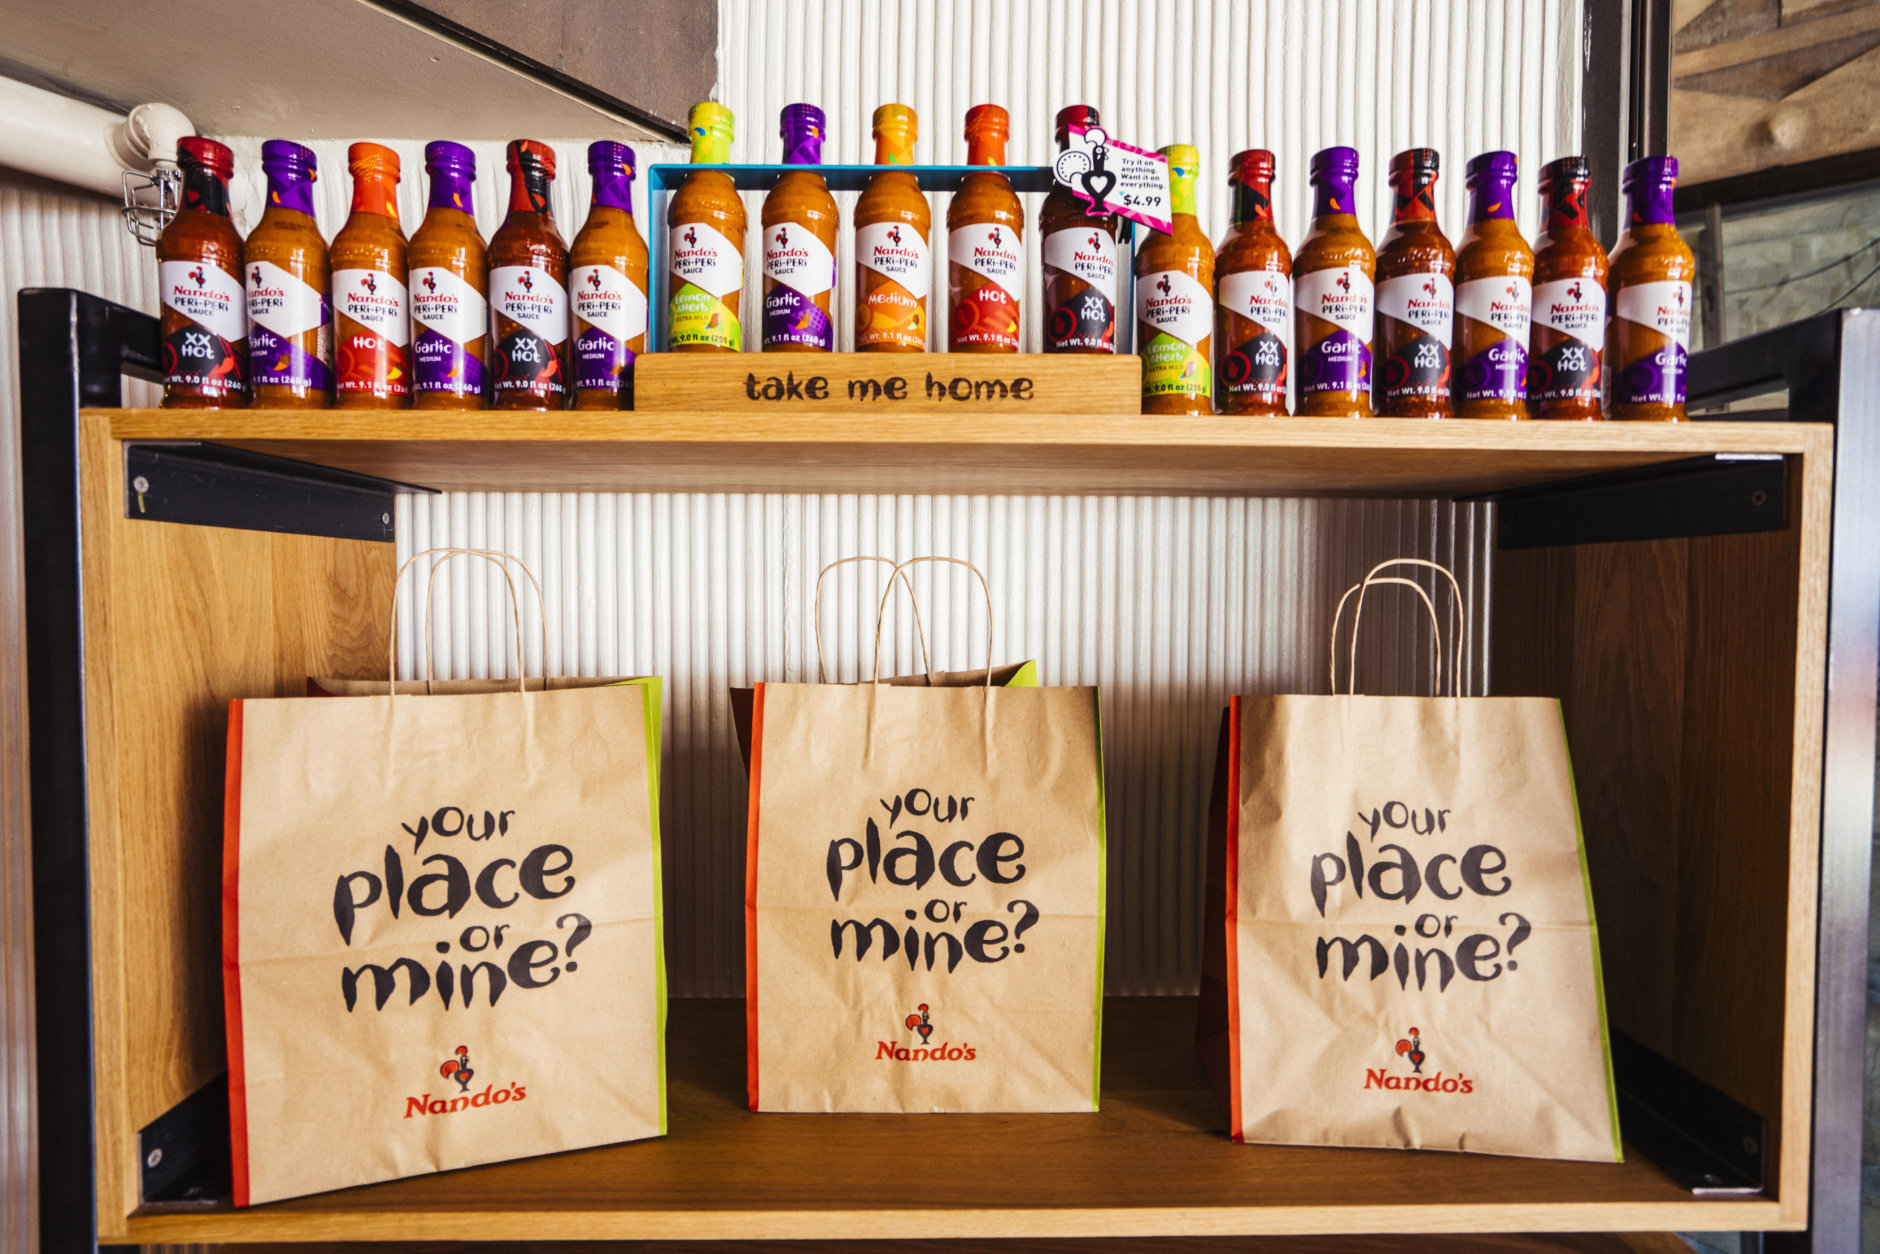 Nando's now has 42 restaurants in the U.S., with most of them in the Washington and Baltimore areas, as well as stores in the Chicago area. (Courtesy Nando’s Peri-Peri)